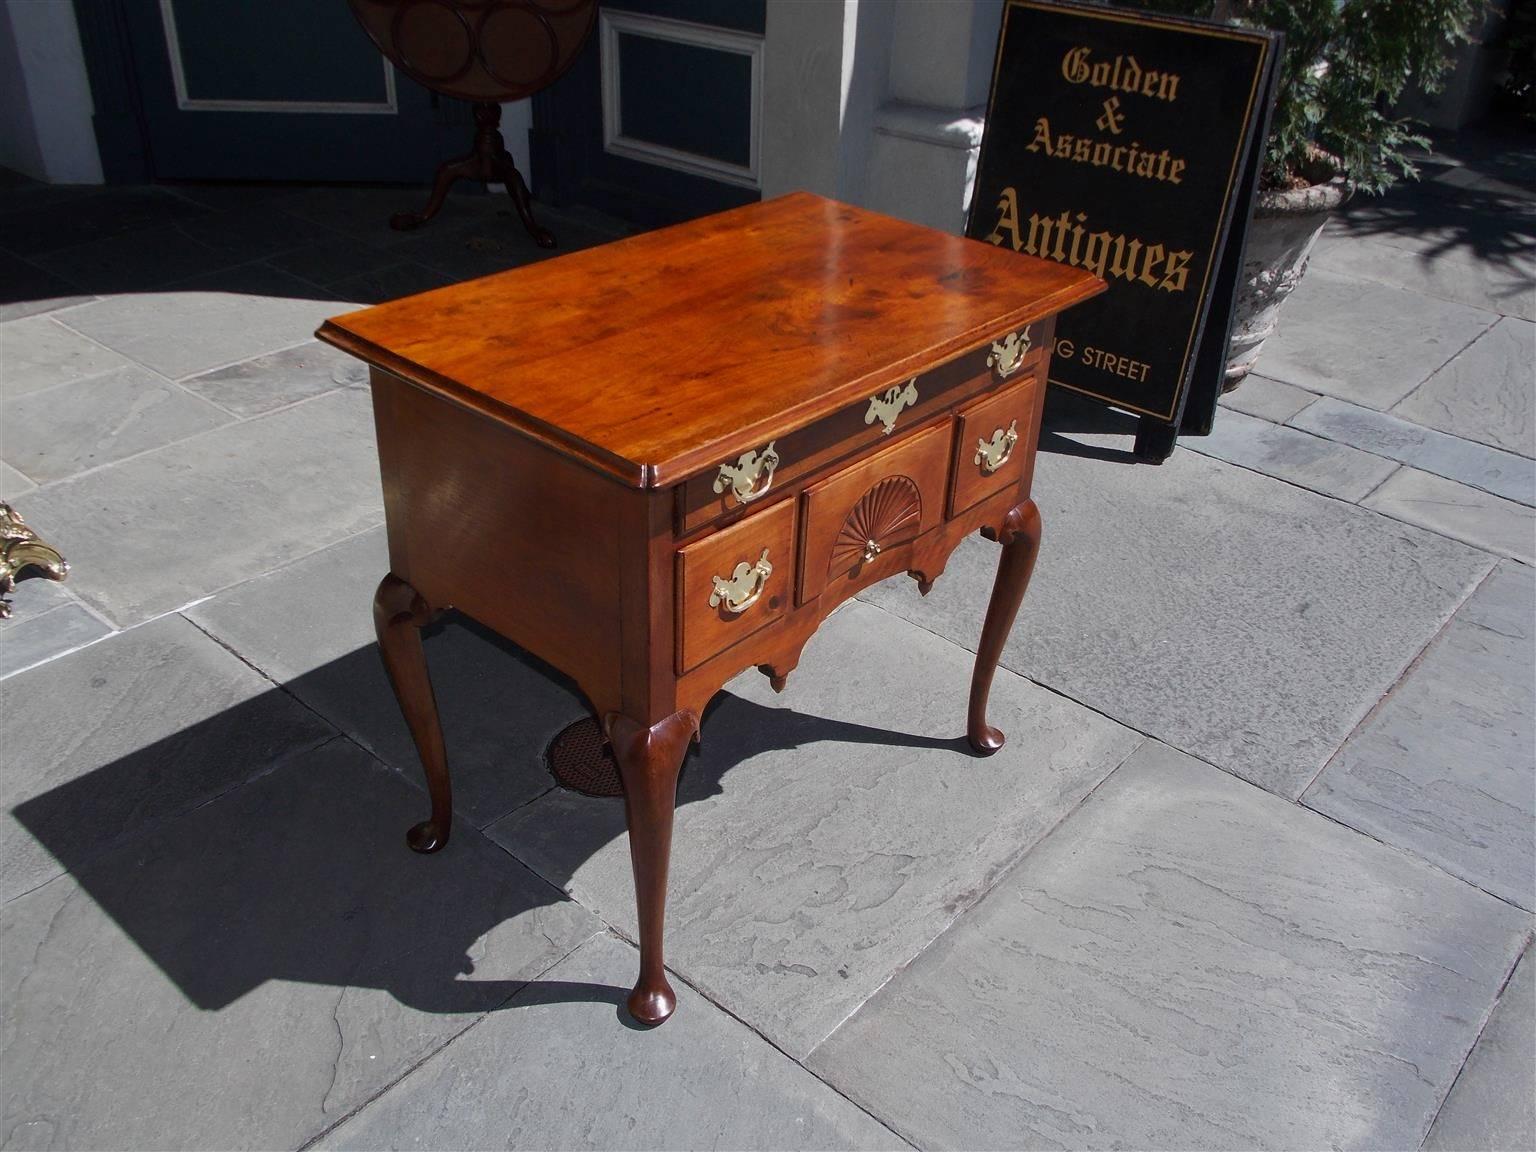 American Queen Anne walnut fan-carved lowboy with a molded edge top, period brasses, carved arched pointed apron, and terminating on graceful tapered pad feet, Mid-18th Century, Connecticut. Secondary wood consist of white pine throughout.